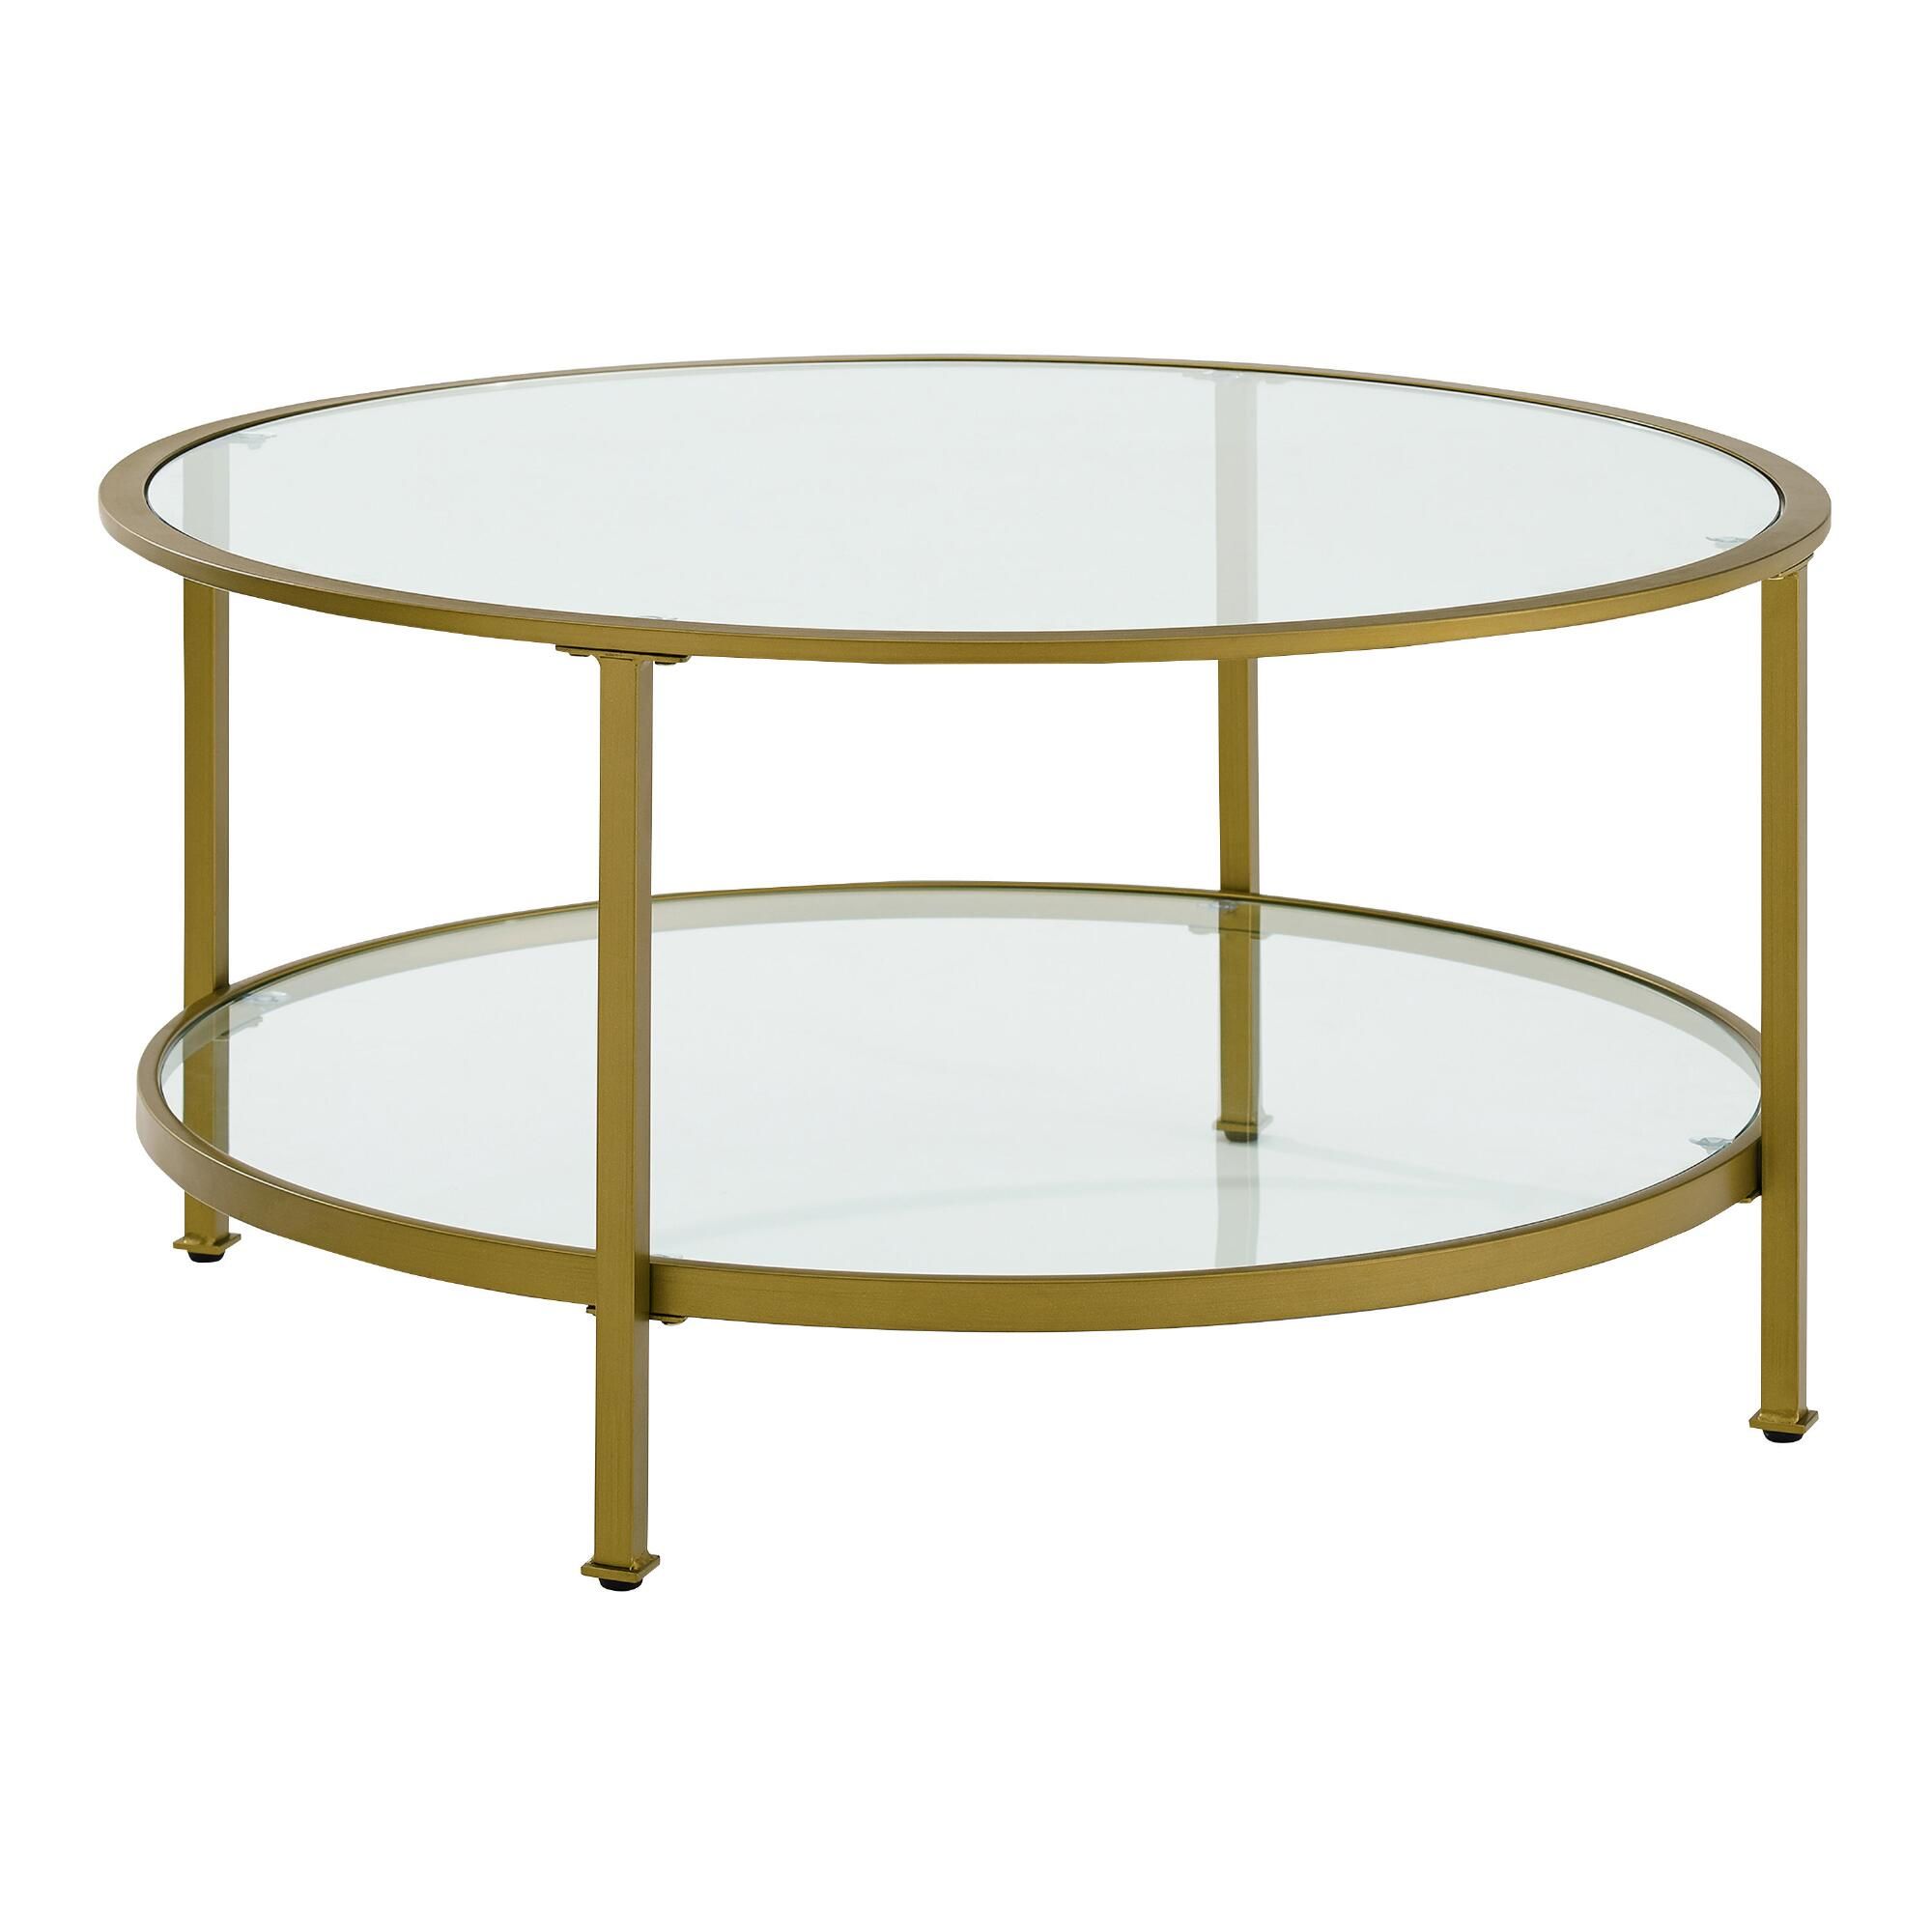 Round Milayan Coffee Table With Shelf: Gold - Glass by World Market | World Market